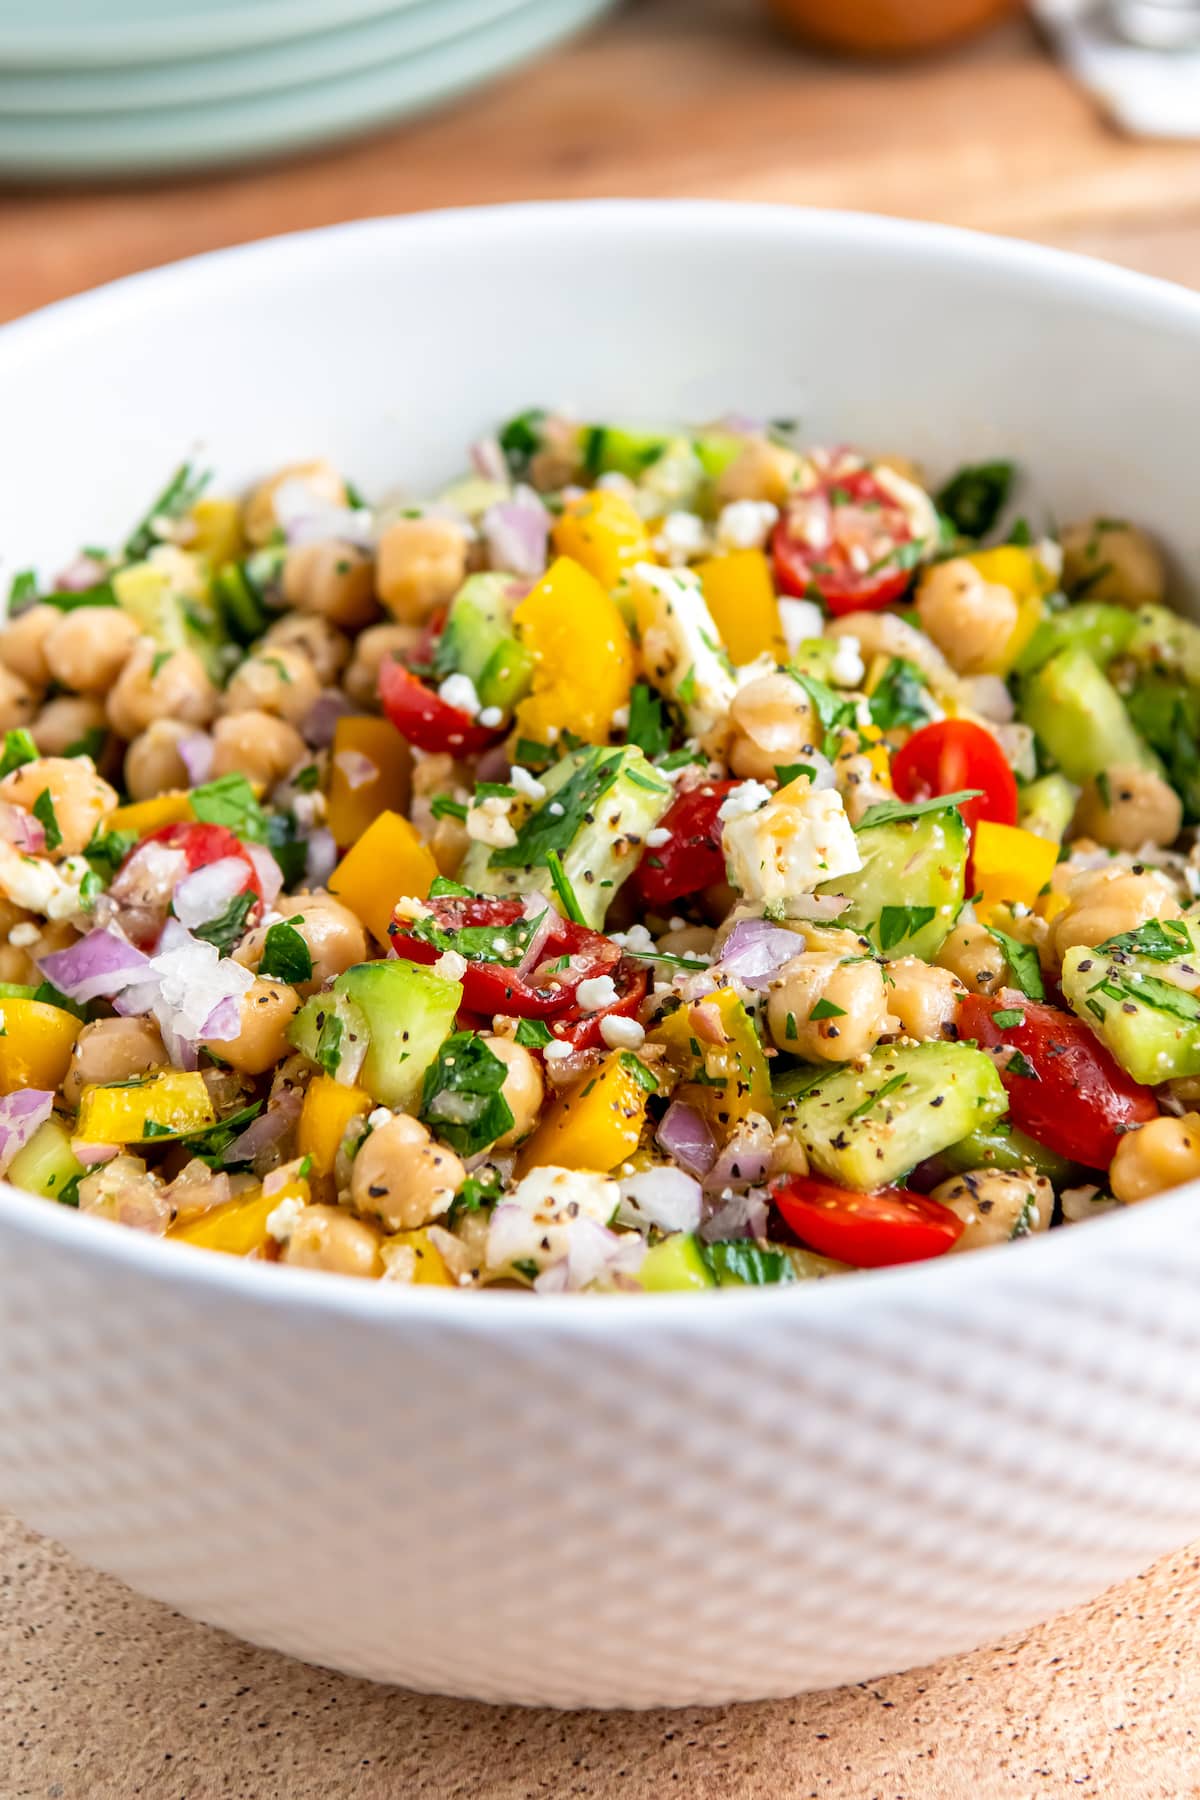 a bowl of chickpea salad with vegetables and herbs